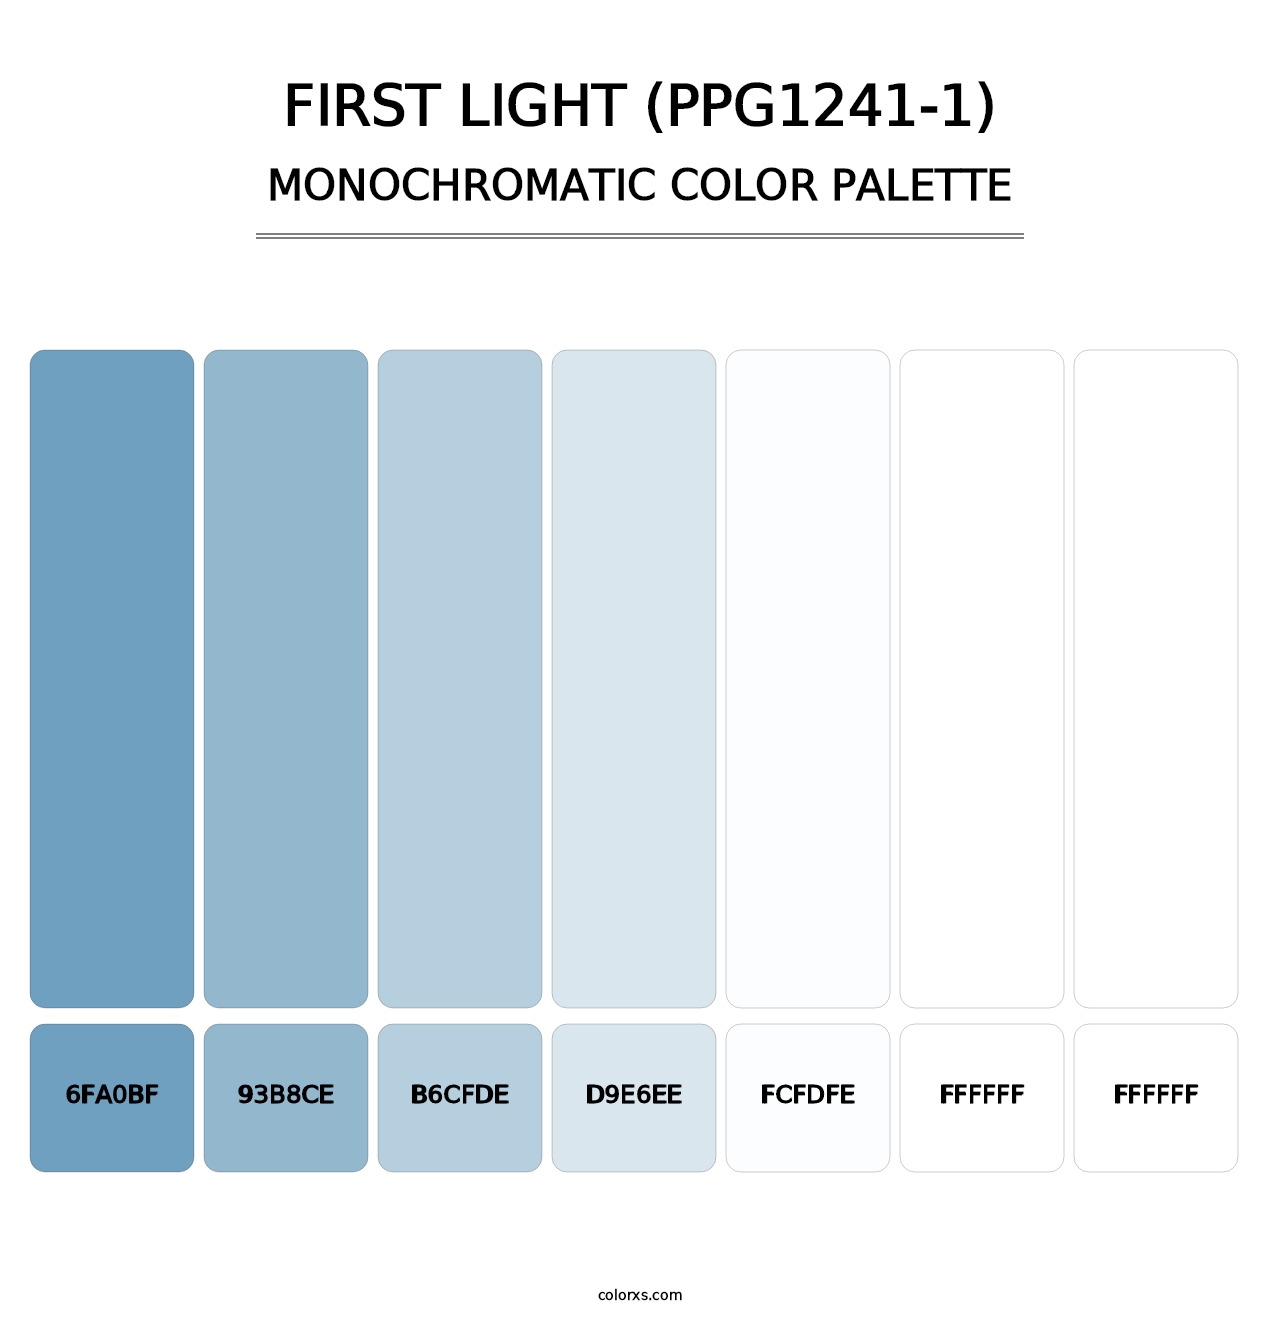 First Light (PPG1241-1) - Monochromatic Color Palette